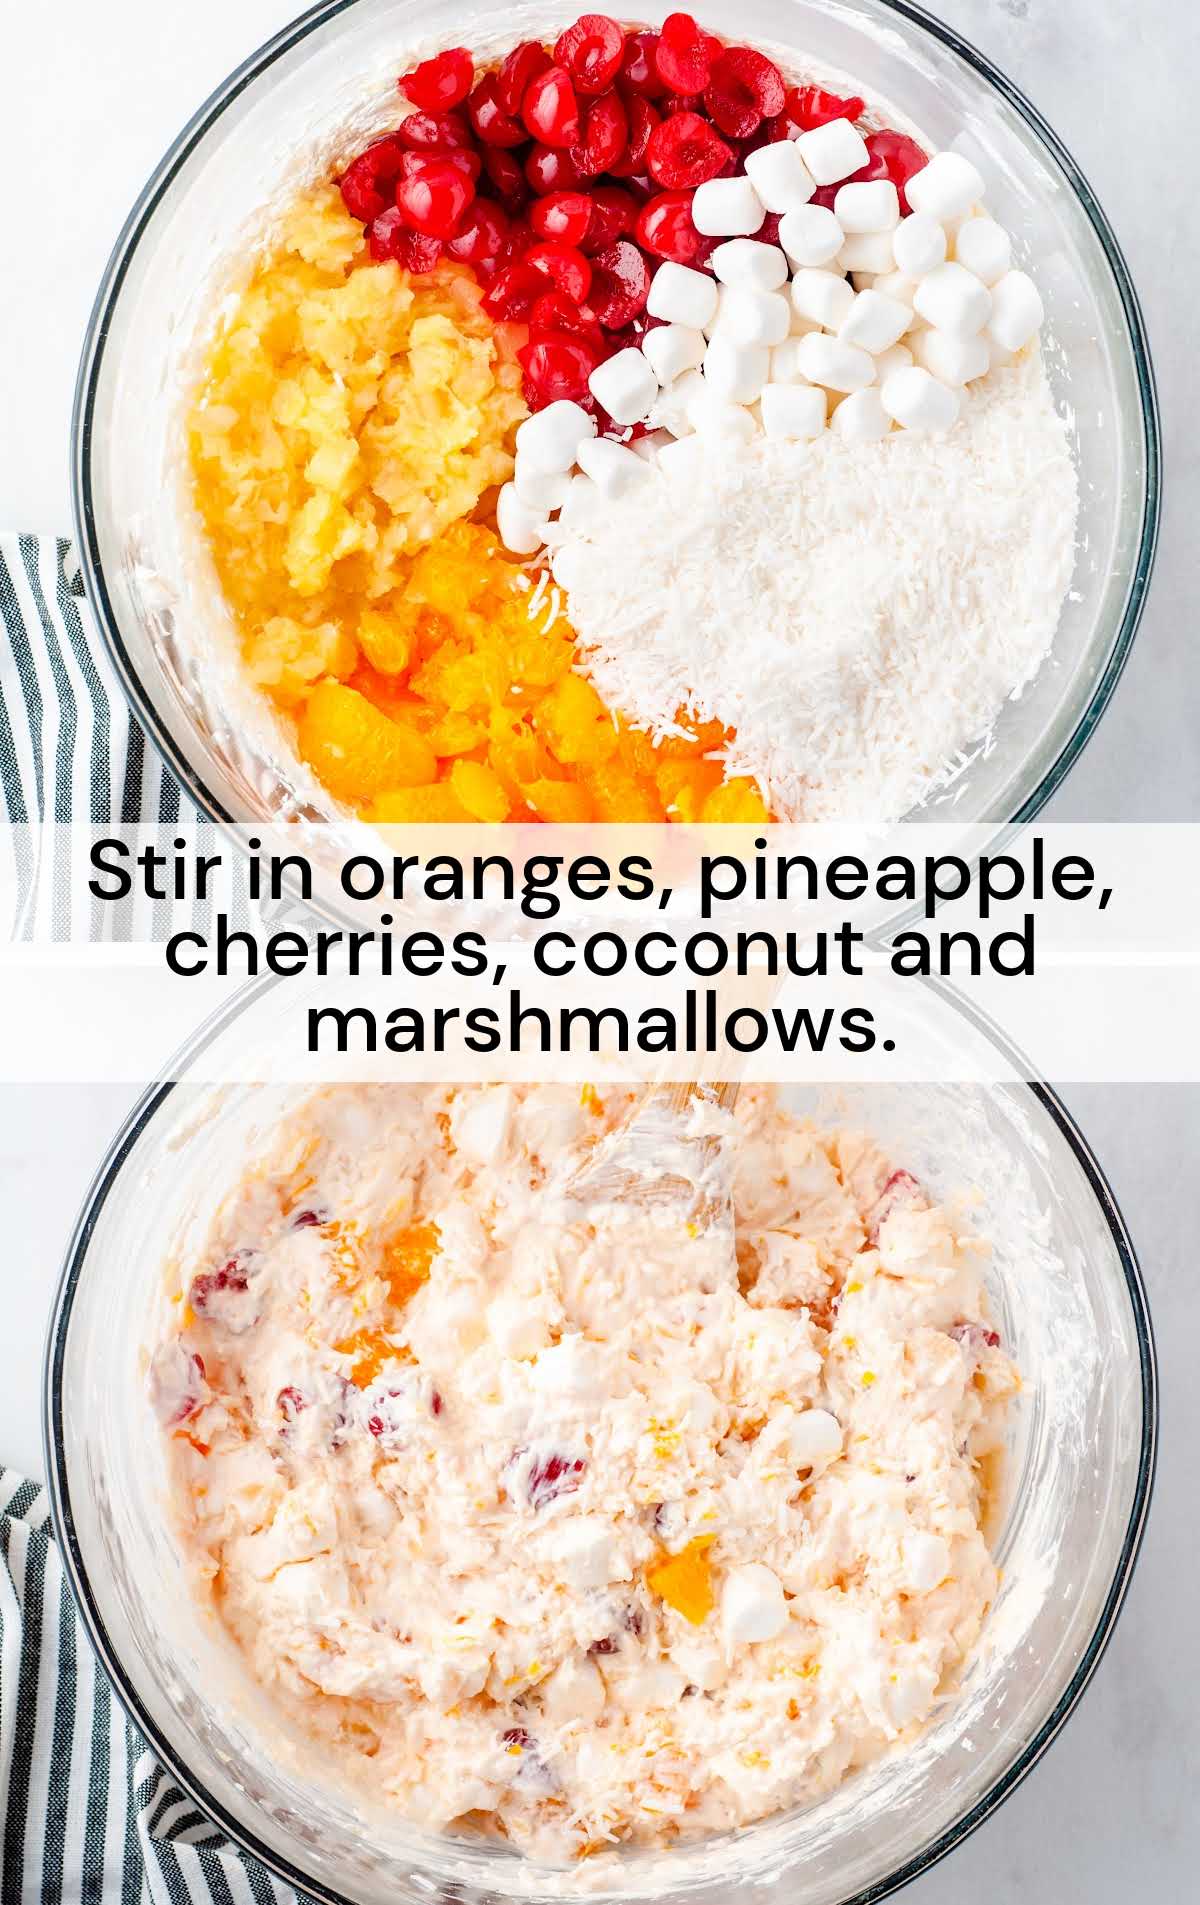 oranges, pineapple, cherries, coconut and marshmallow stir in a bowl